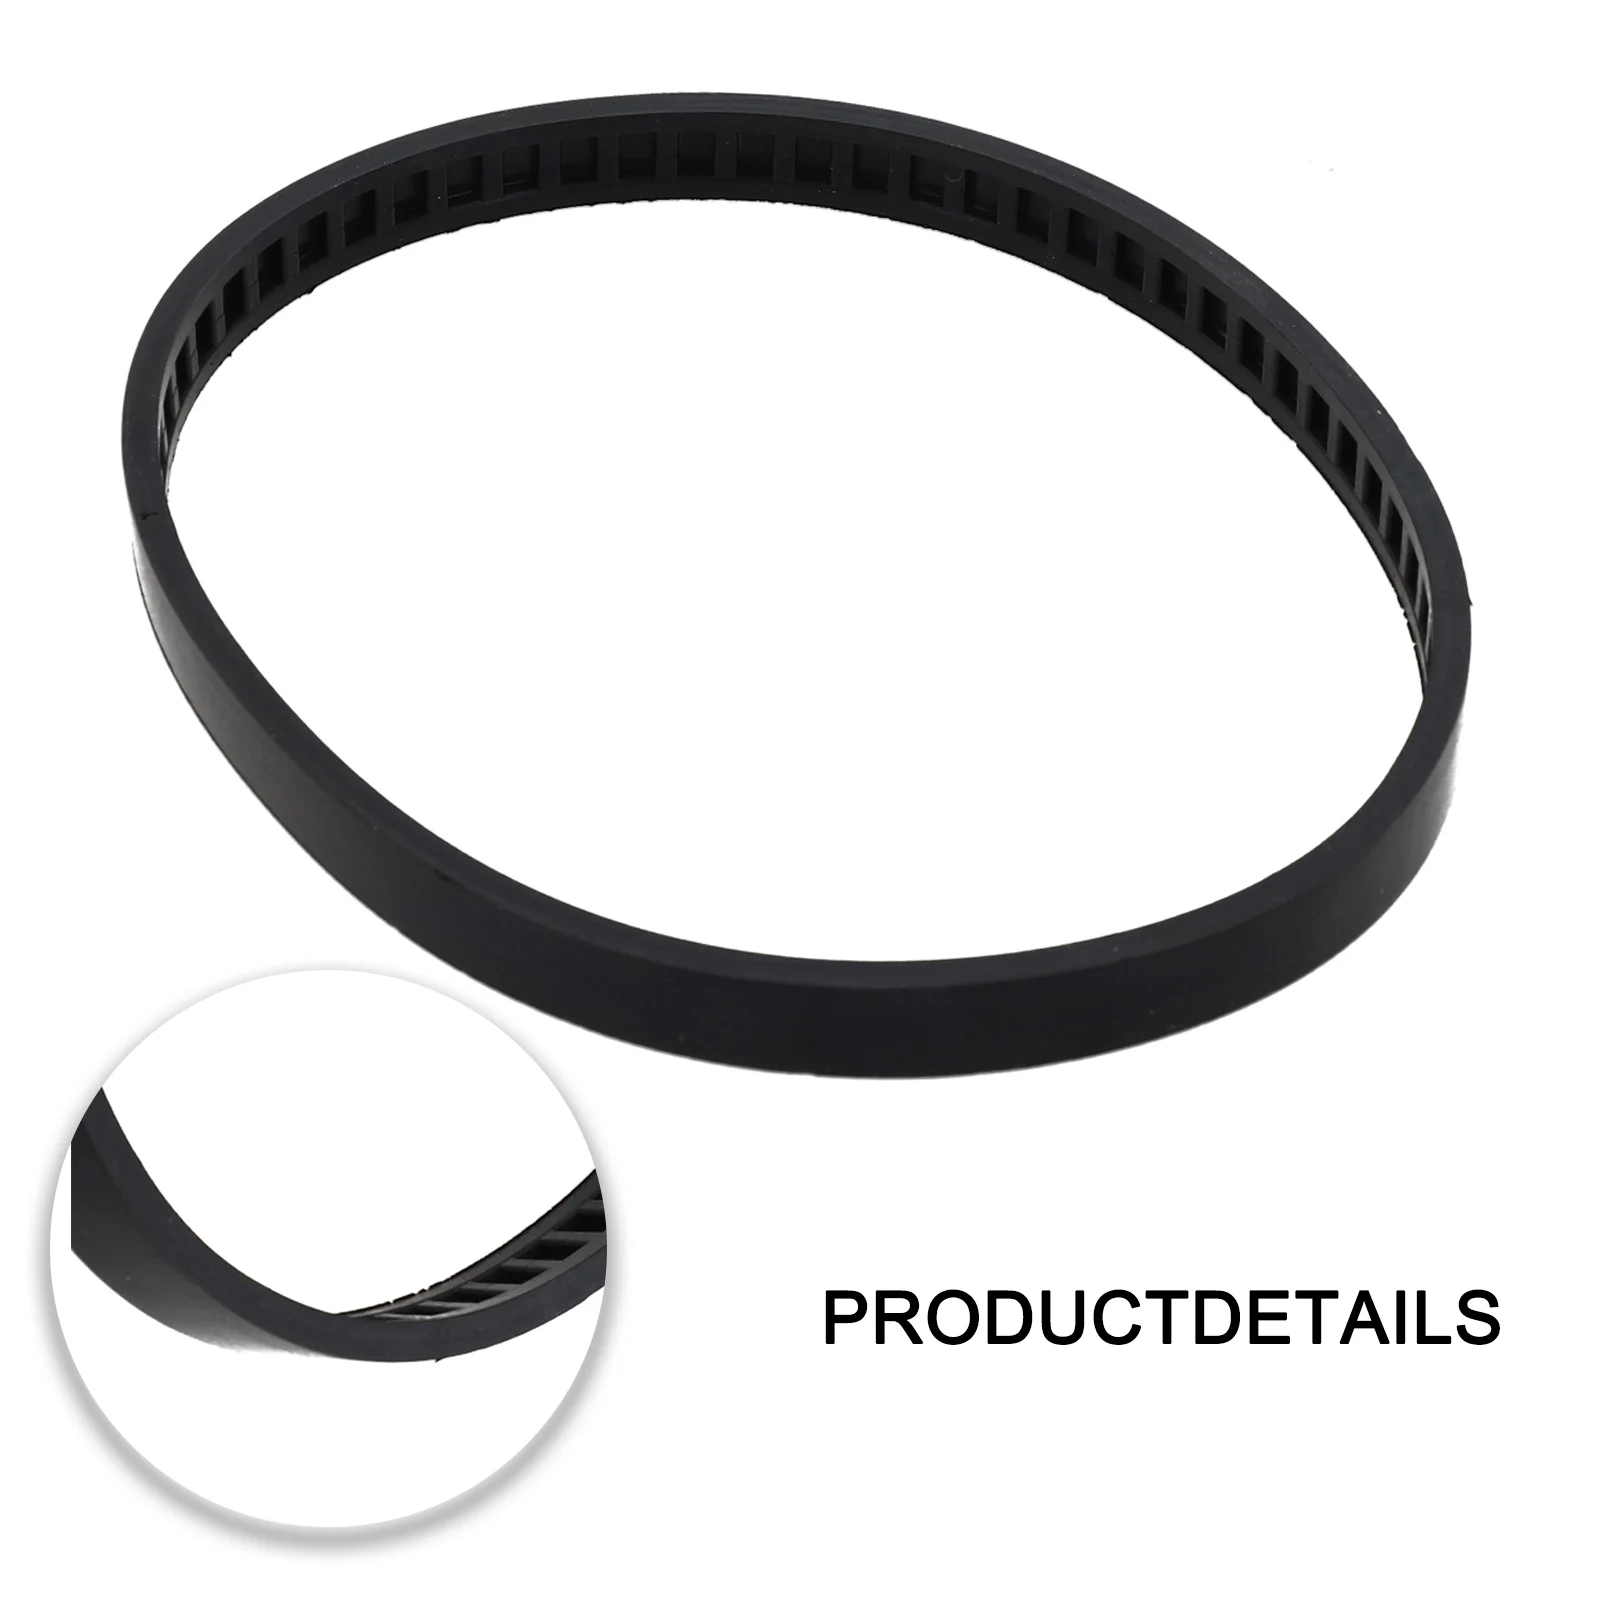 htd 5m timing belt 445 500 600 700 710mm length 20mm width 5mm pitch rubber pulley belt teeth 89t 142t htd 5m synchronous belt 45-69-0010 Blade Pulley Tire For Milwaukee Bandsaw Part Deep Cutting Blades Balck Elastic Rubber Belt For Bandsaw Blade